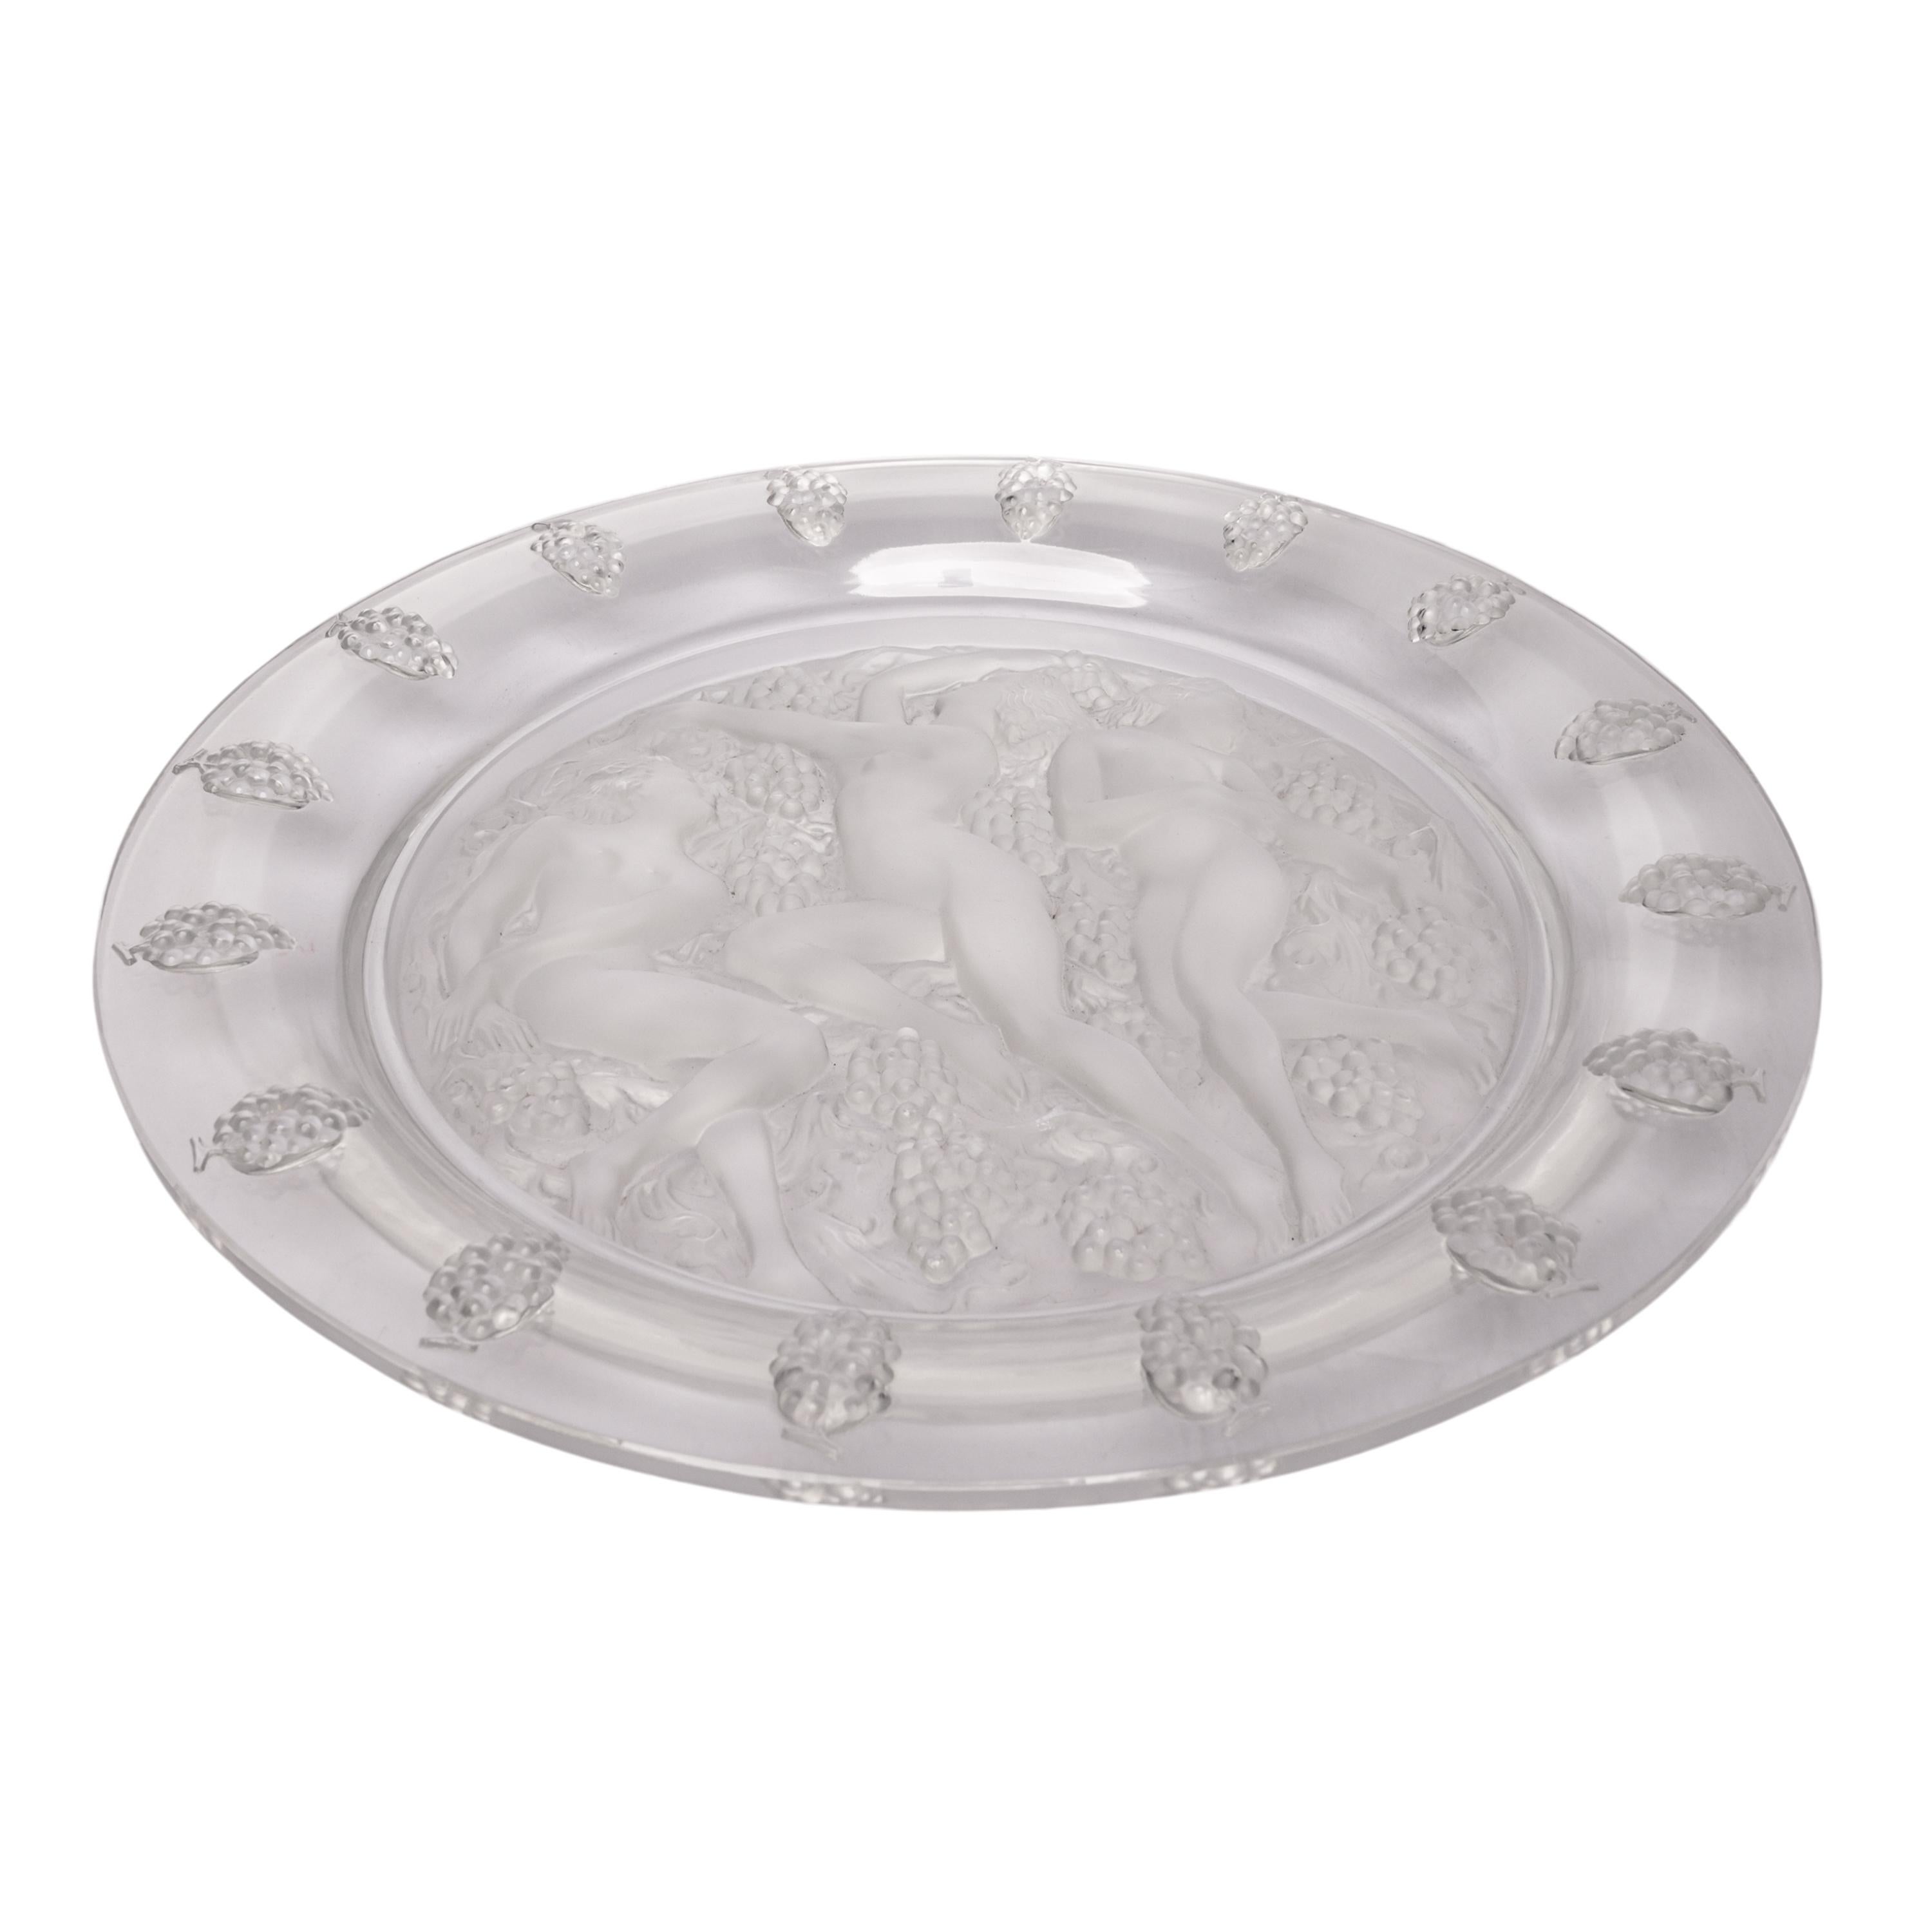  Large Art Deco Rene Lalique Glass Cote d'Or Bachantes Charger Bowl Platter 1943 In Good Condition For Sale In Portland, OR